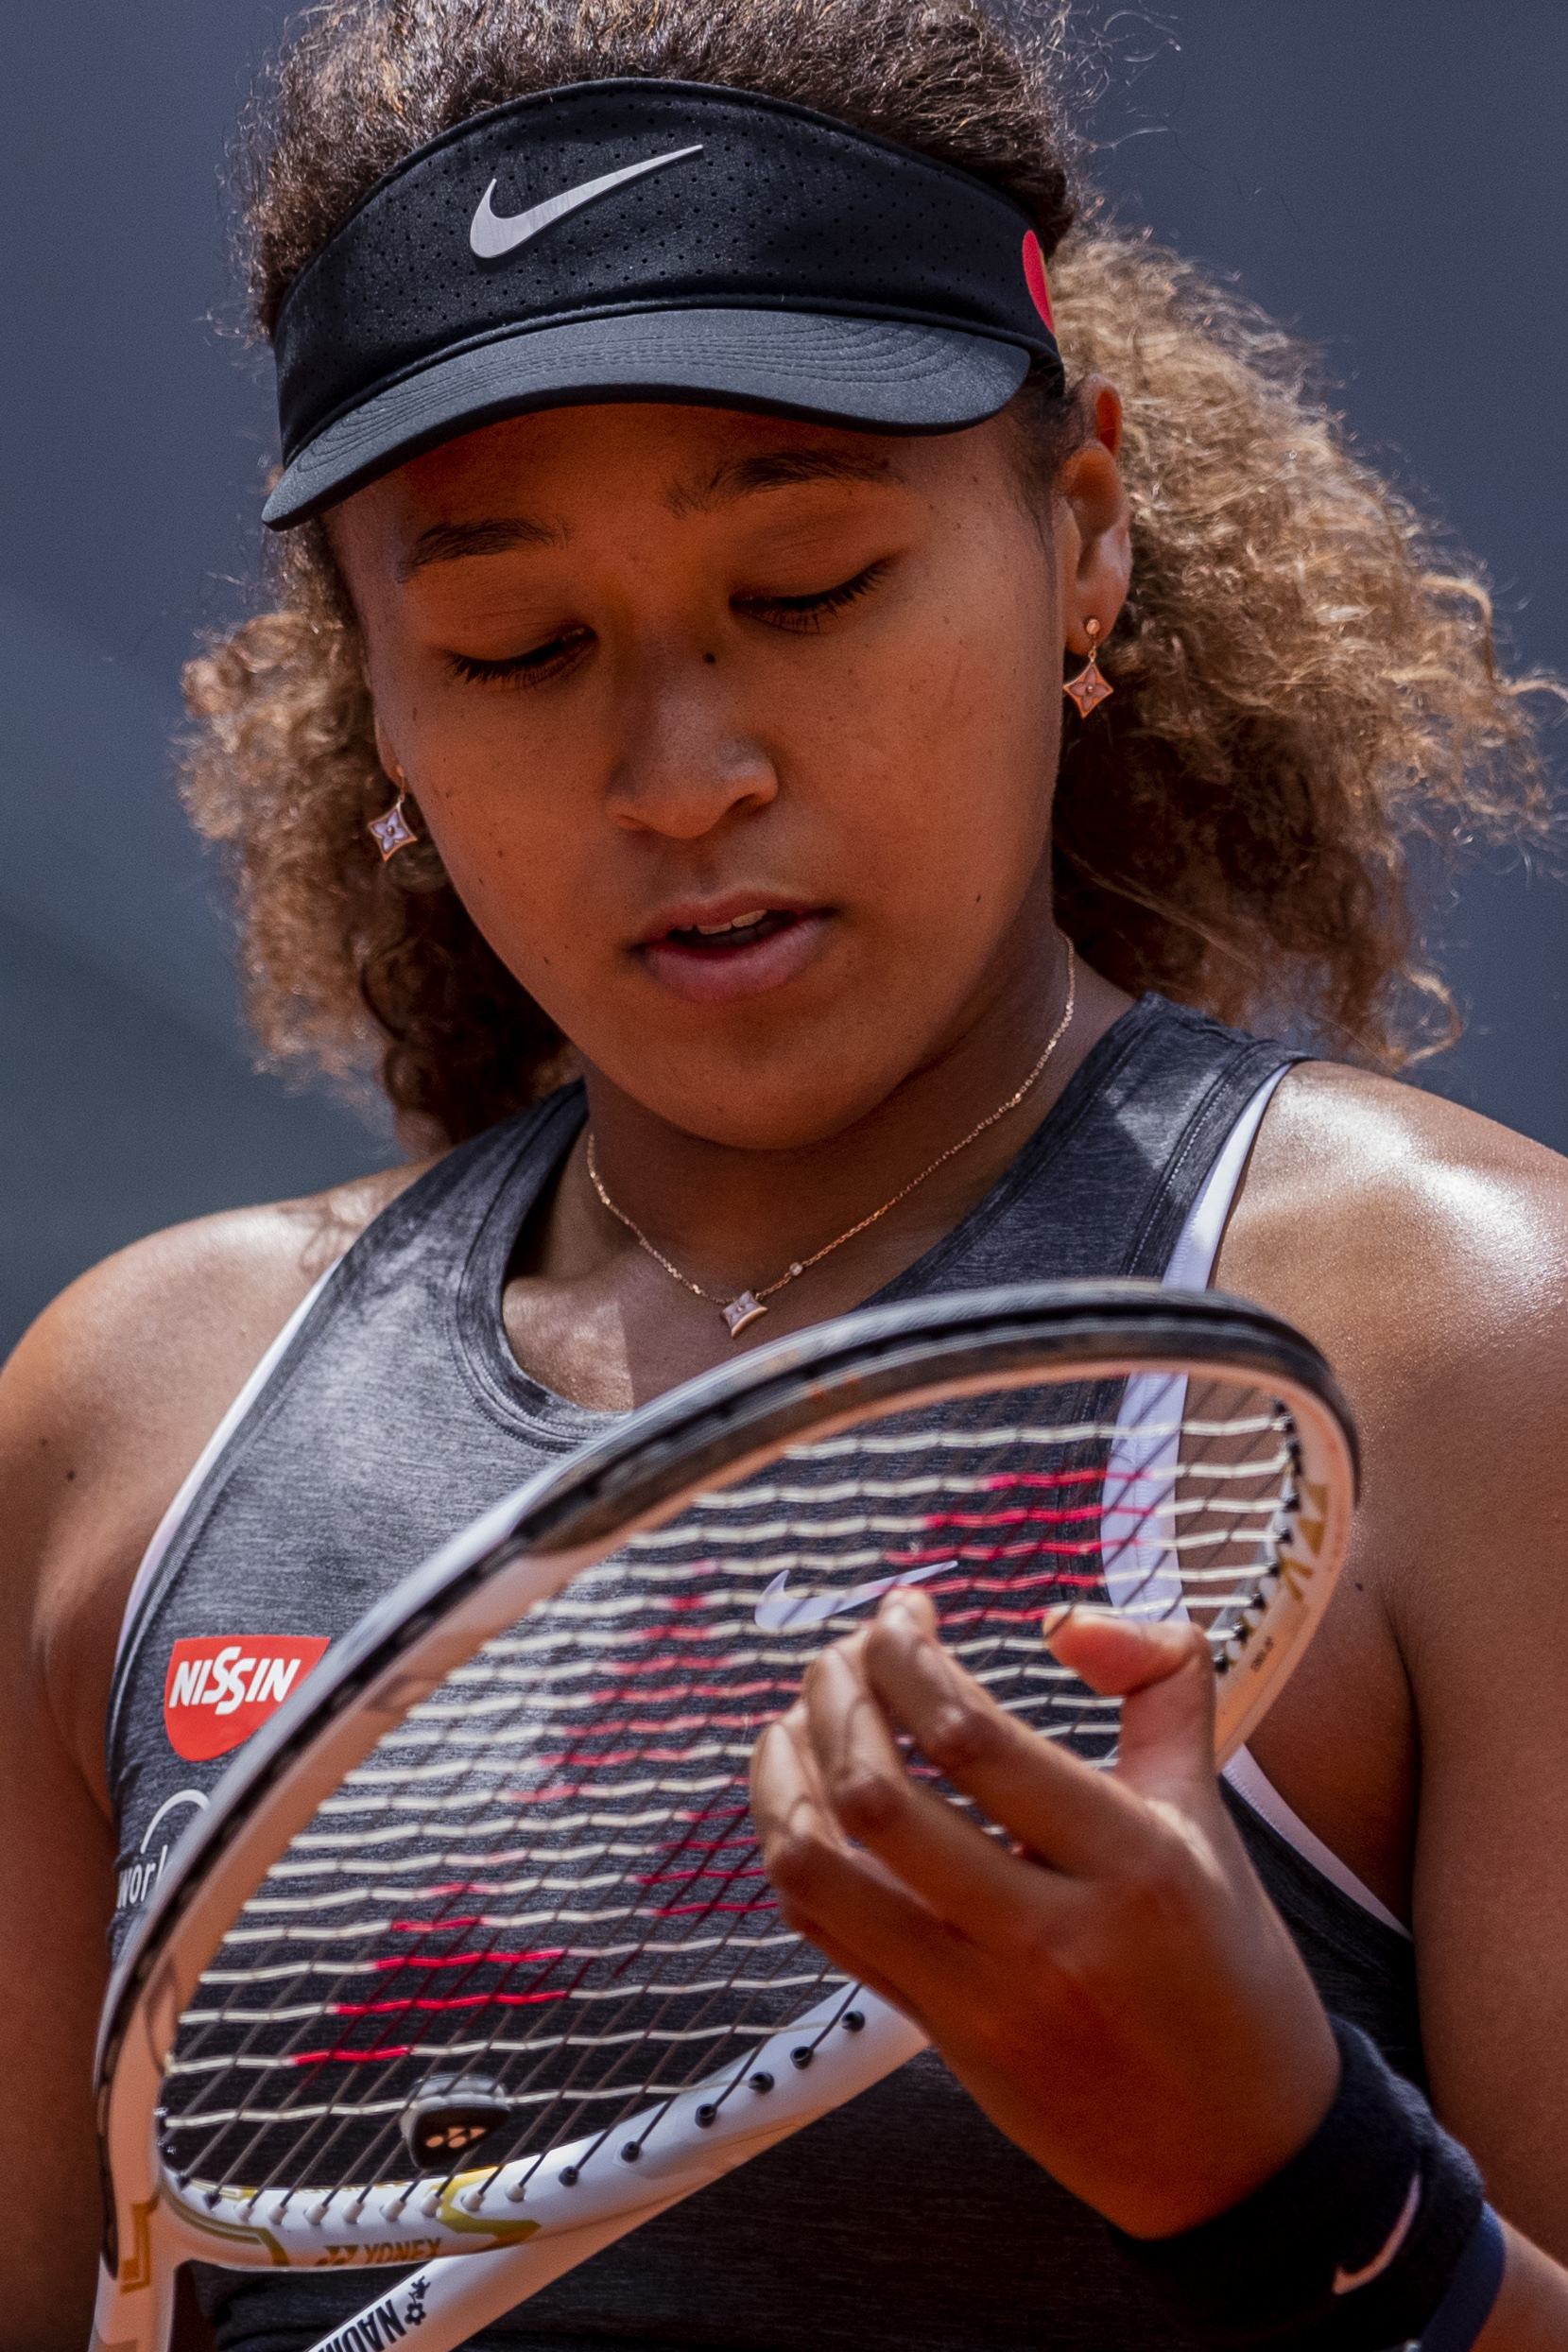 Blueland on Instagram: A moment for Naomi Osaka who paused to